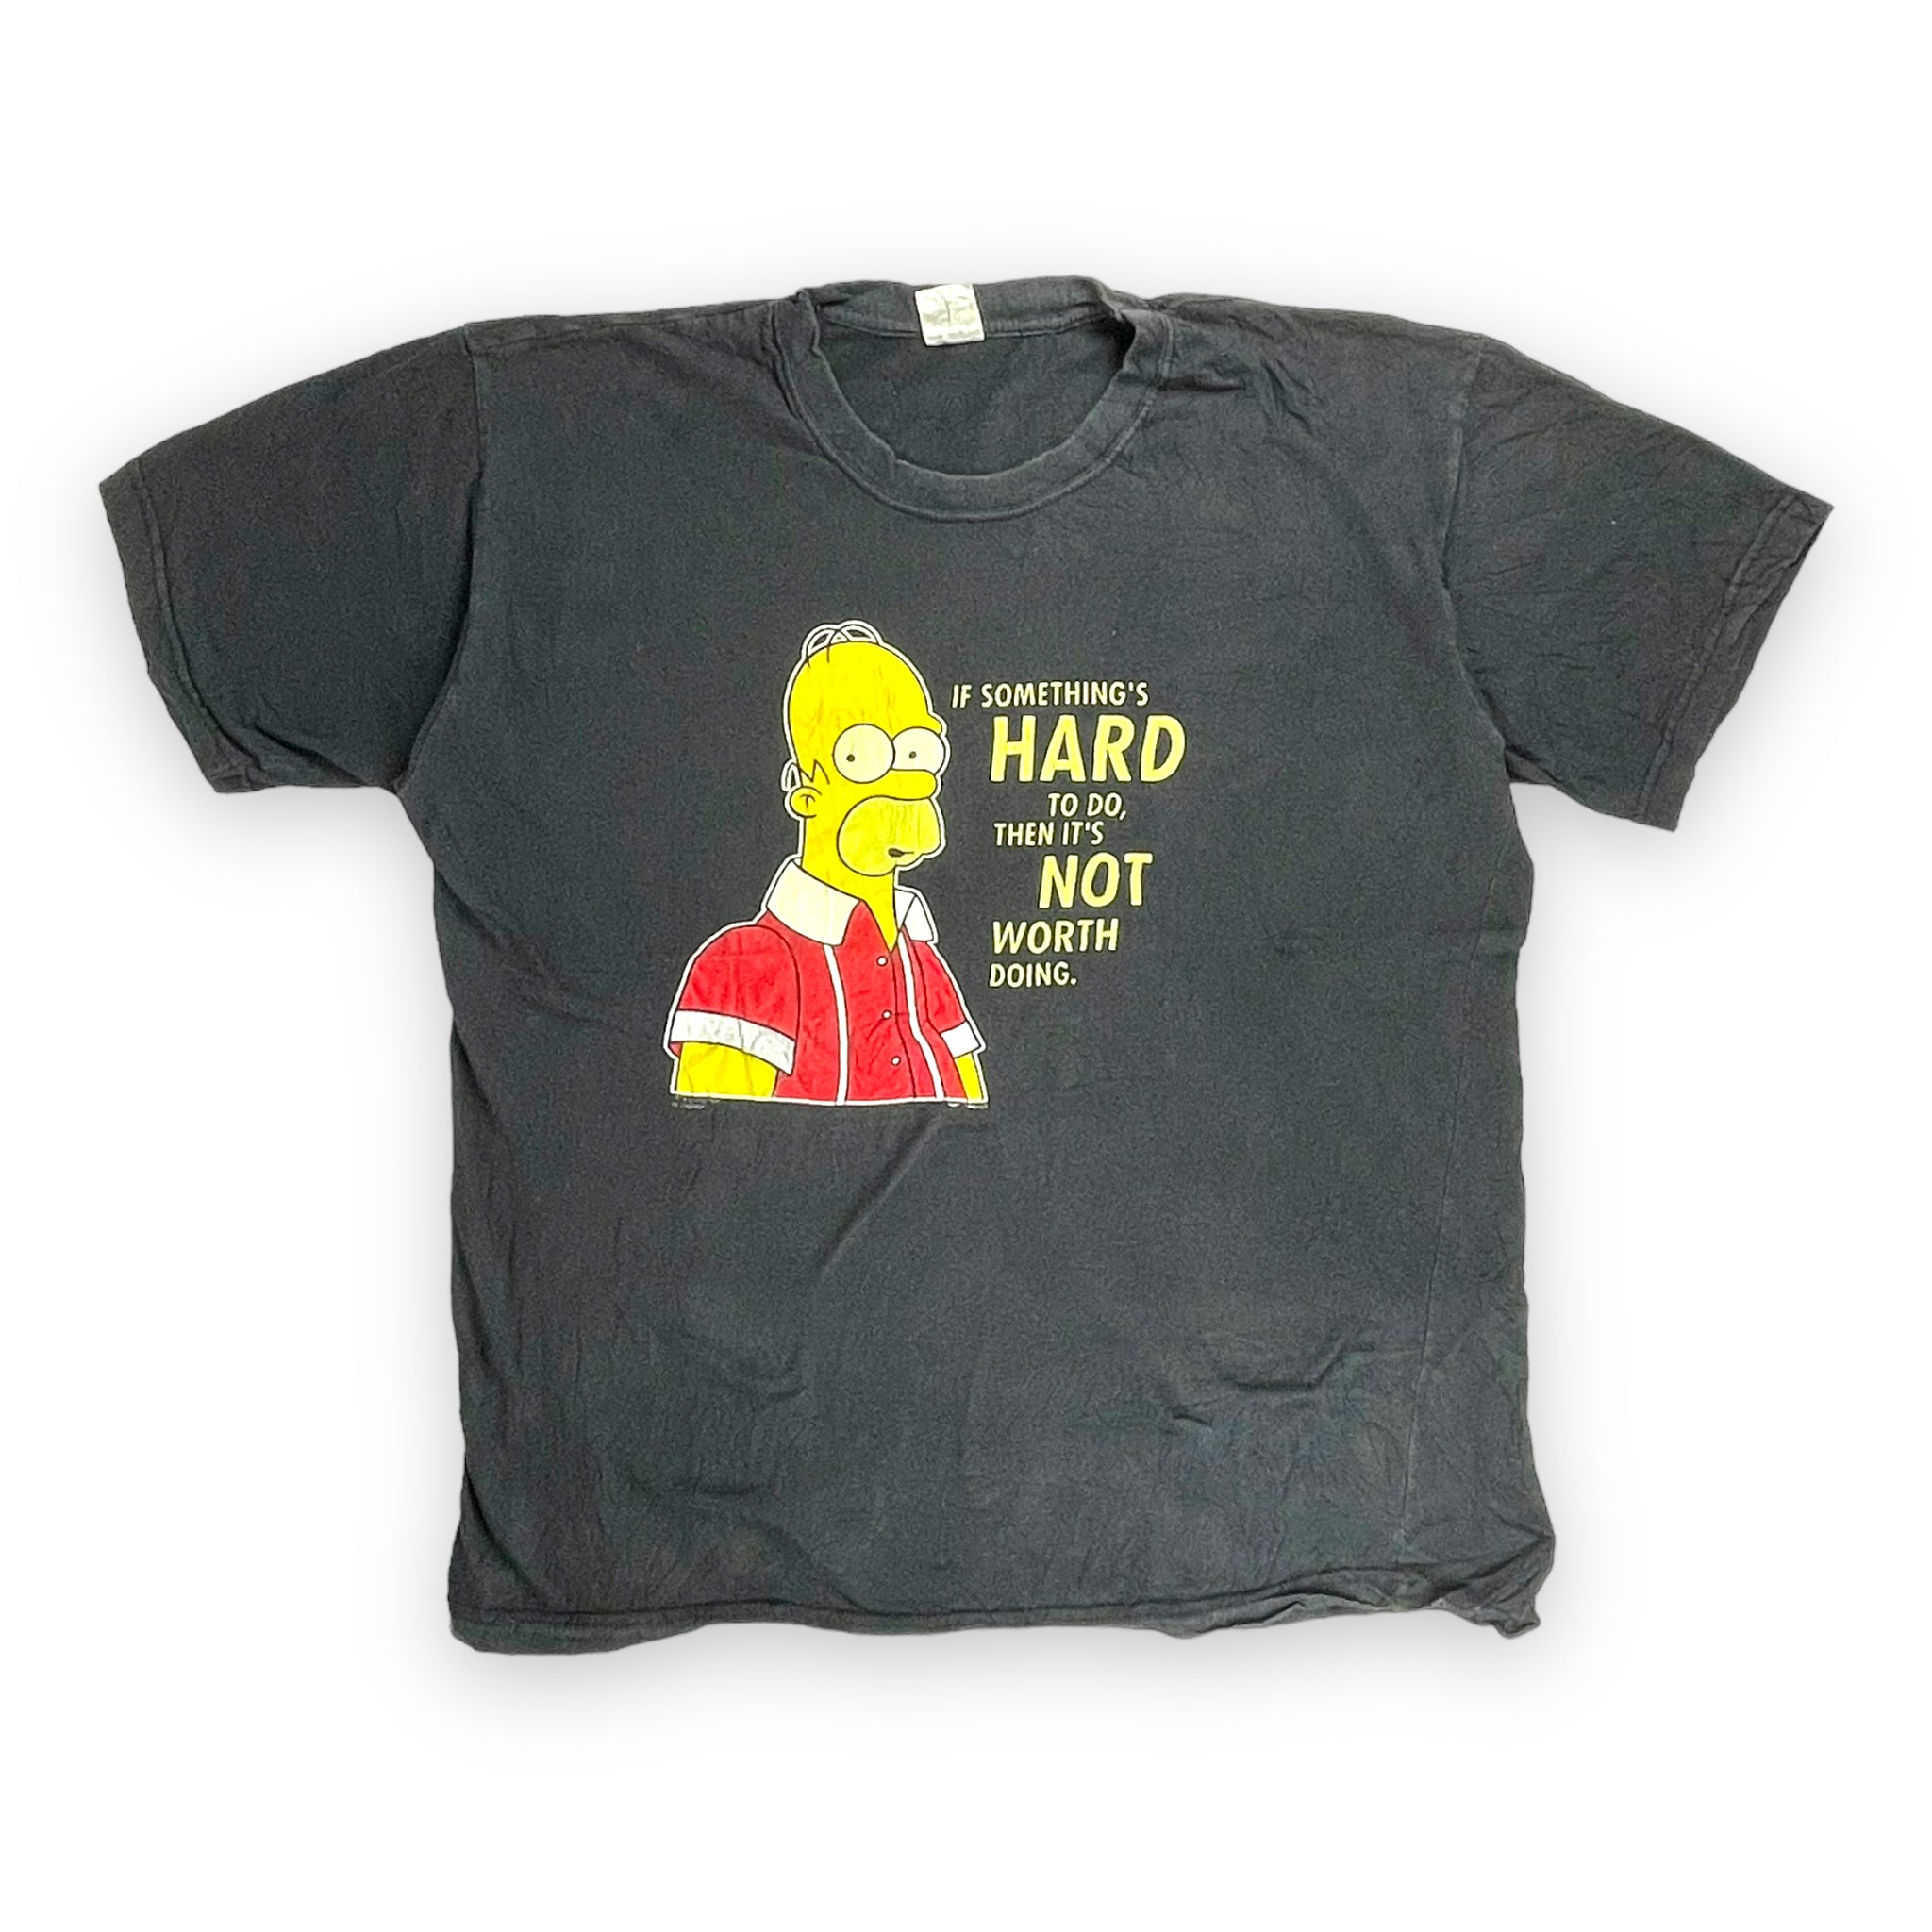 Vintage early 00s The Simpsons T-Shirt